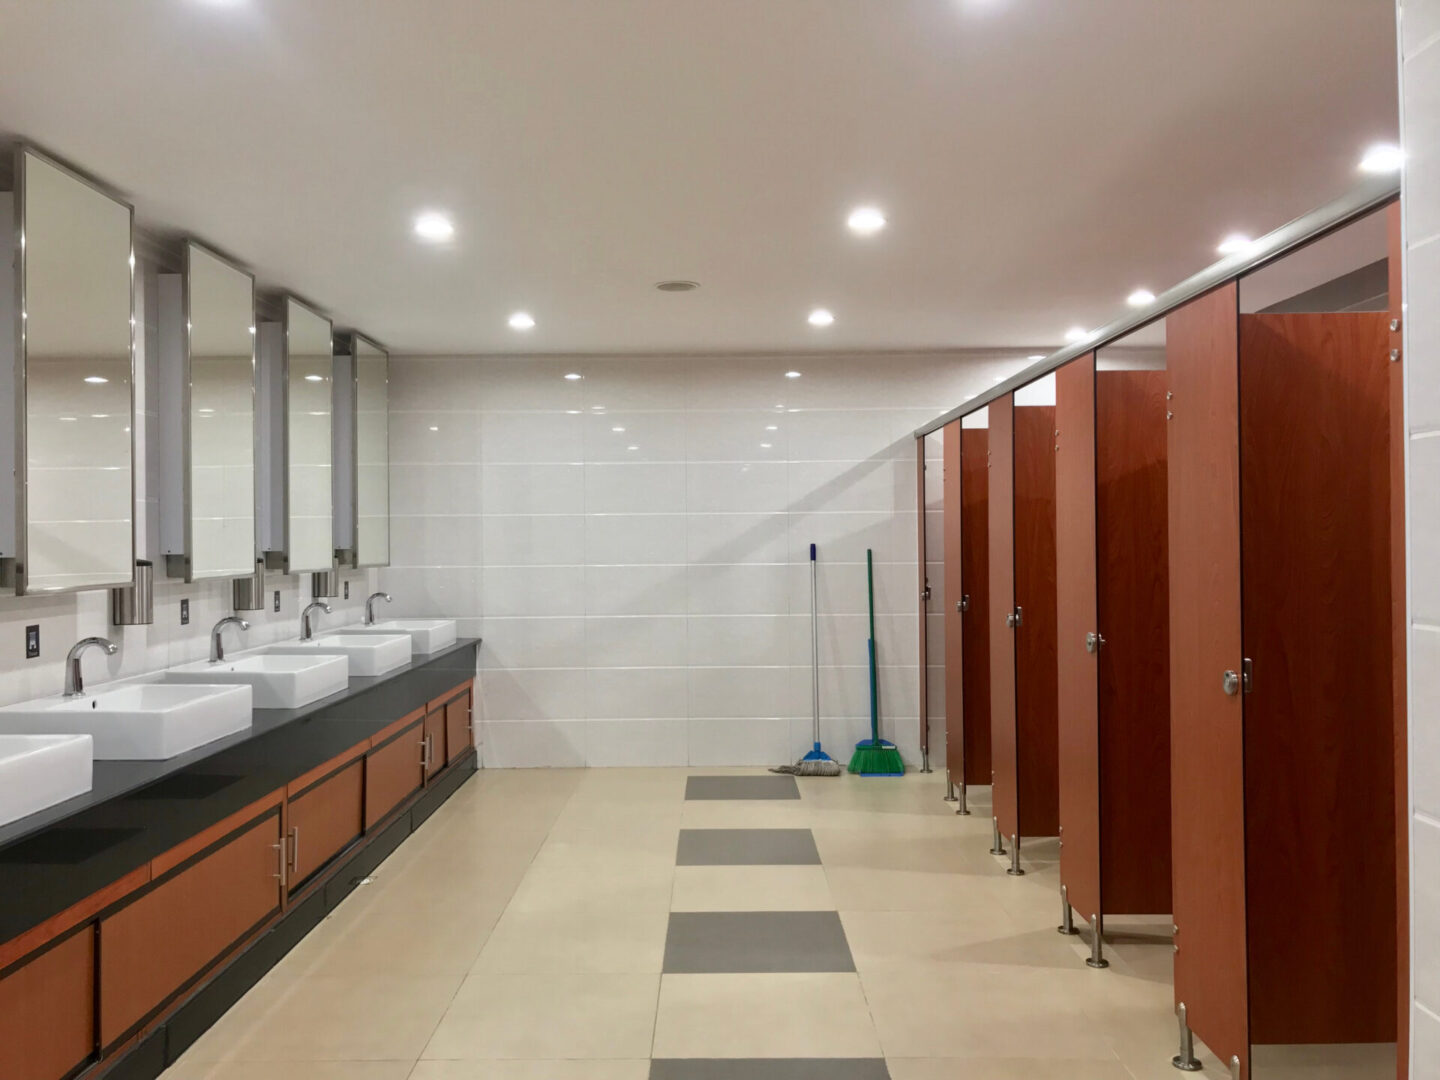 A bathroom with many stalls and sinks